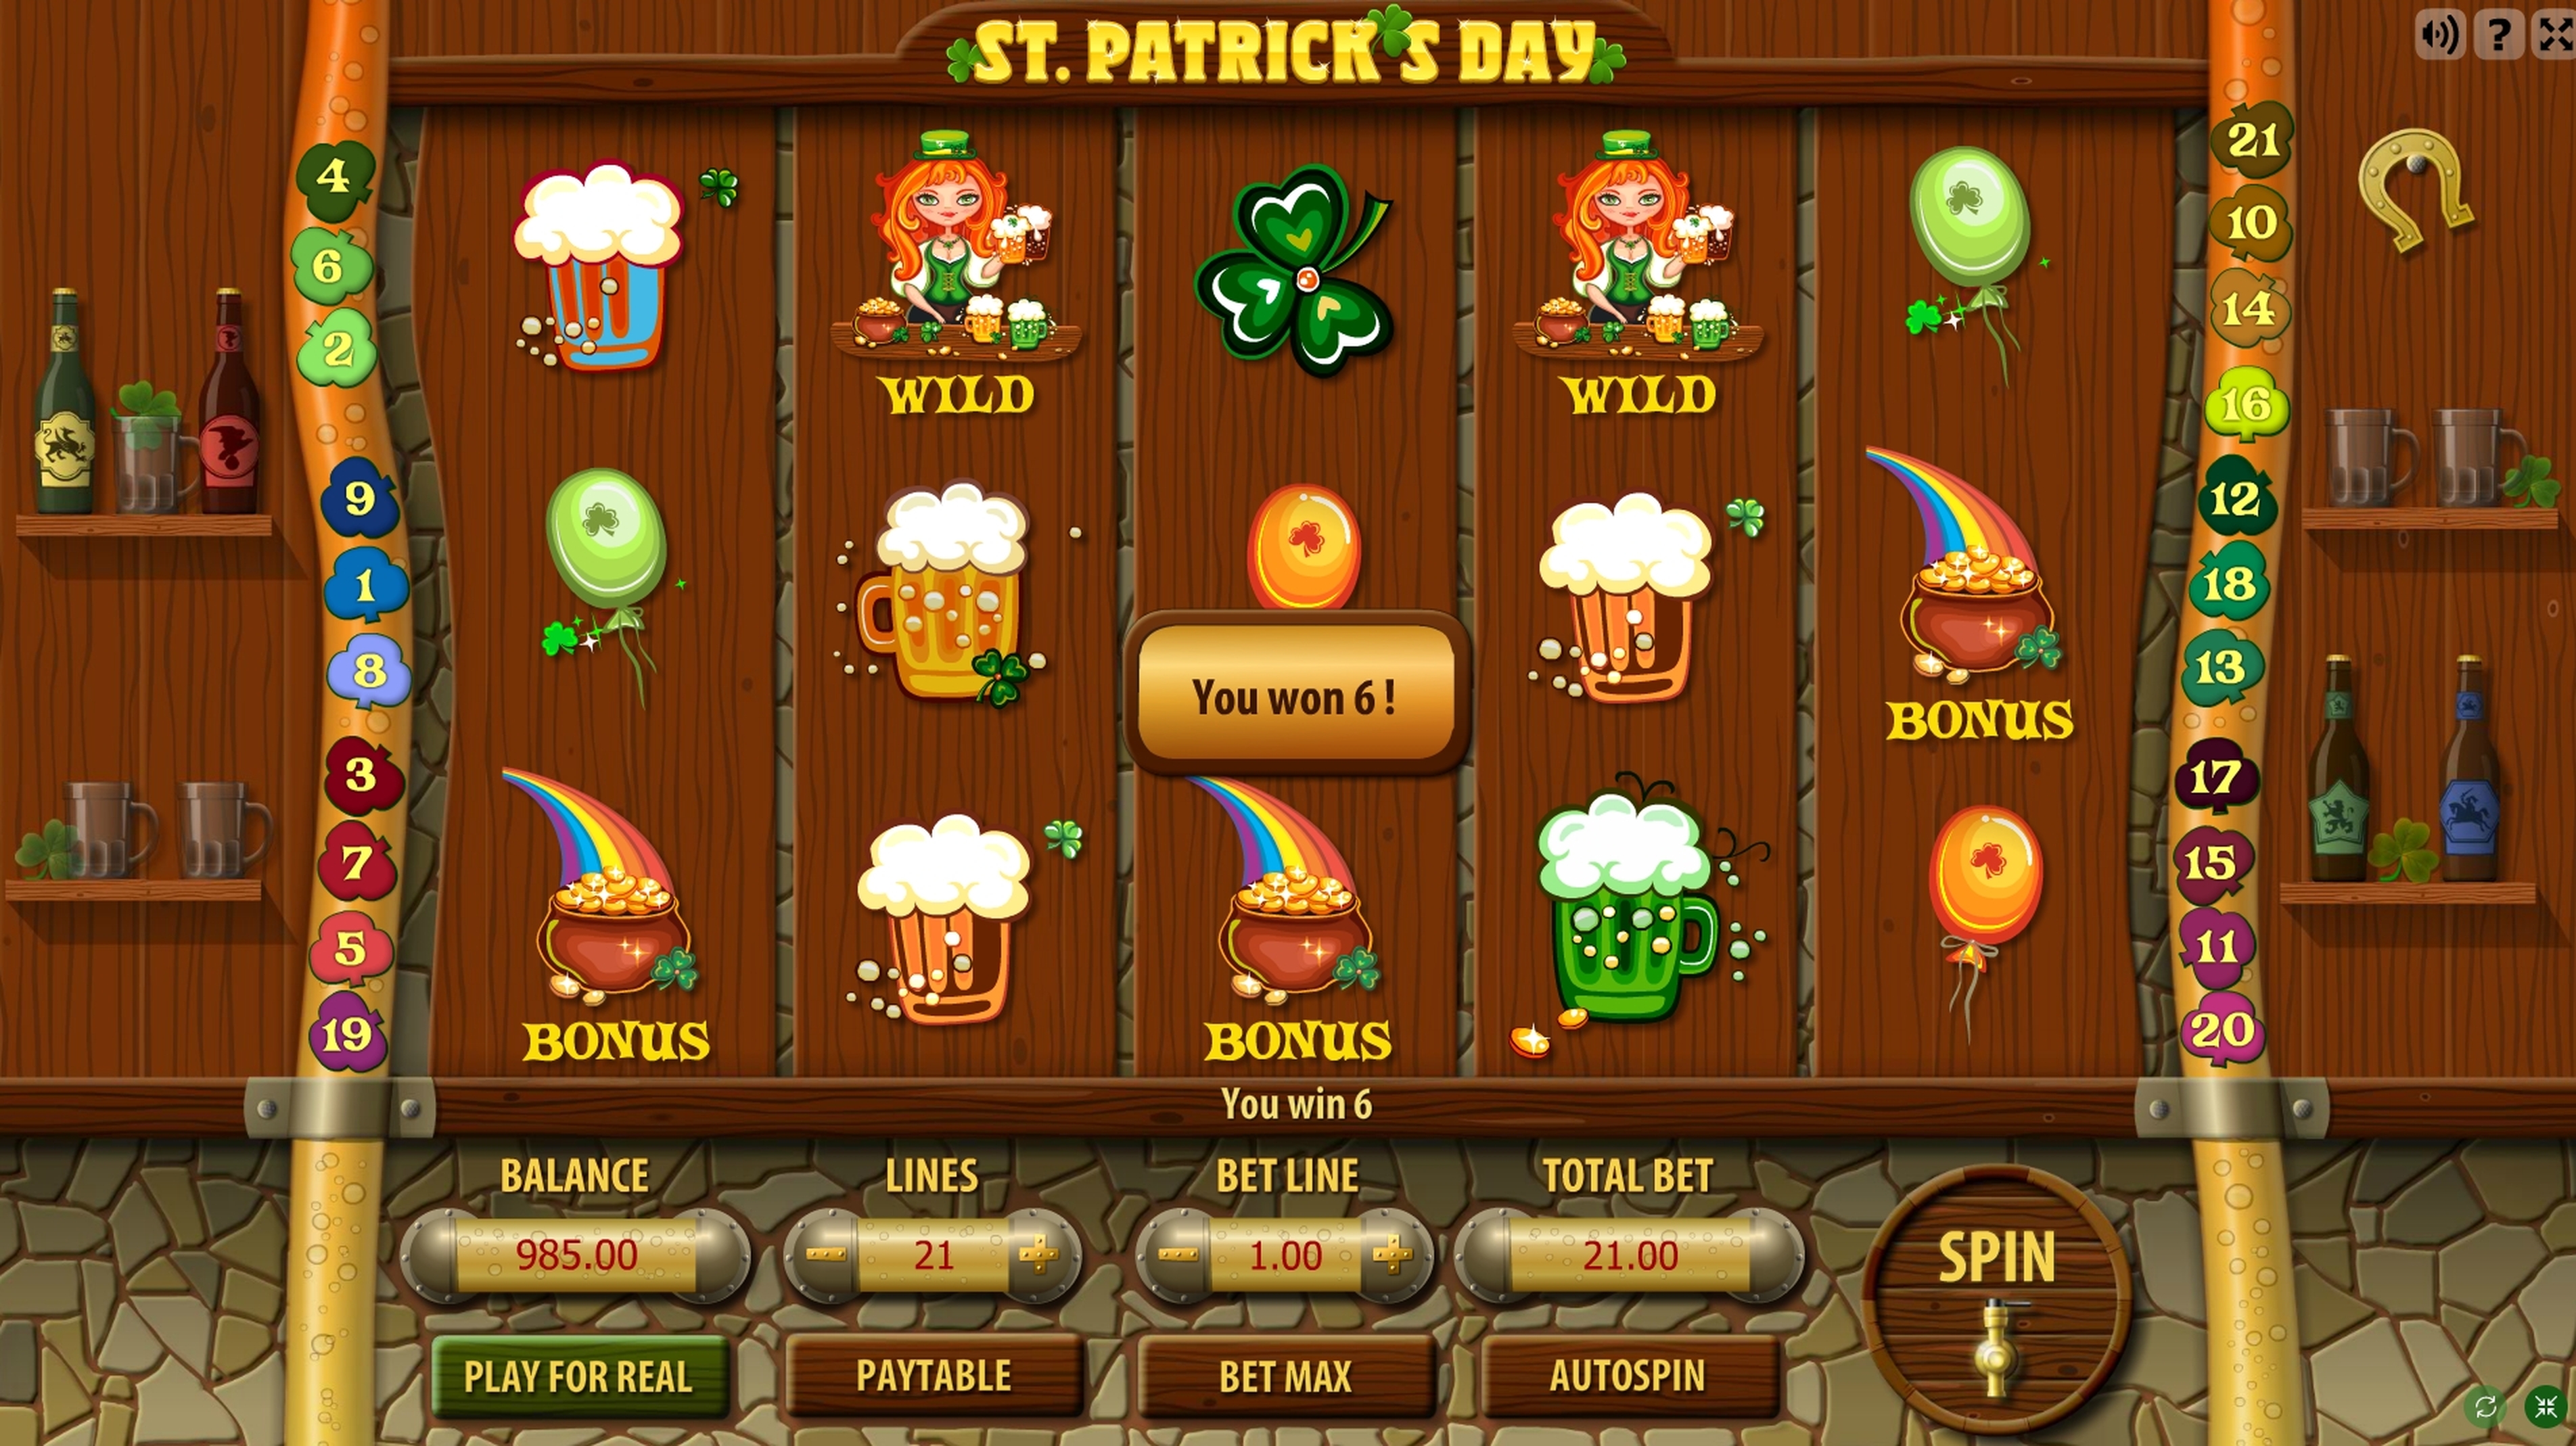 Win Money in St Patricks Day Free Slot Game by Gamescale Software